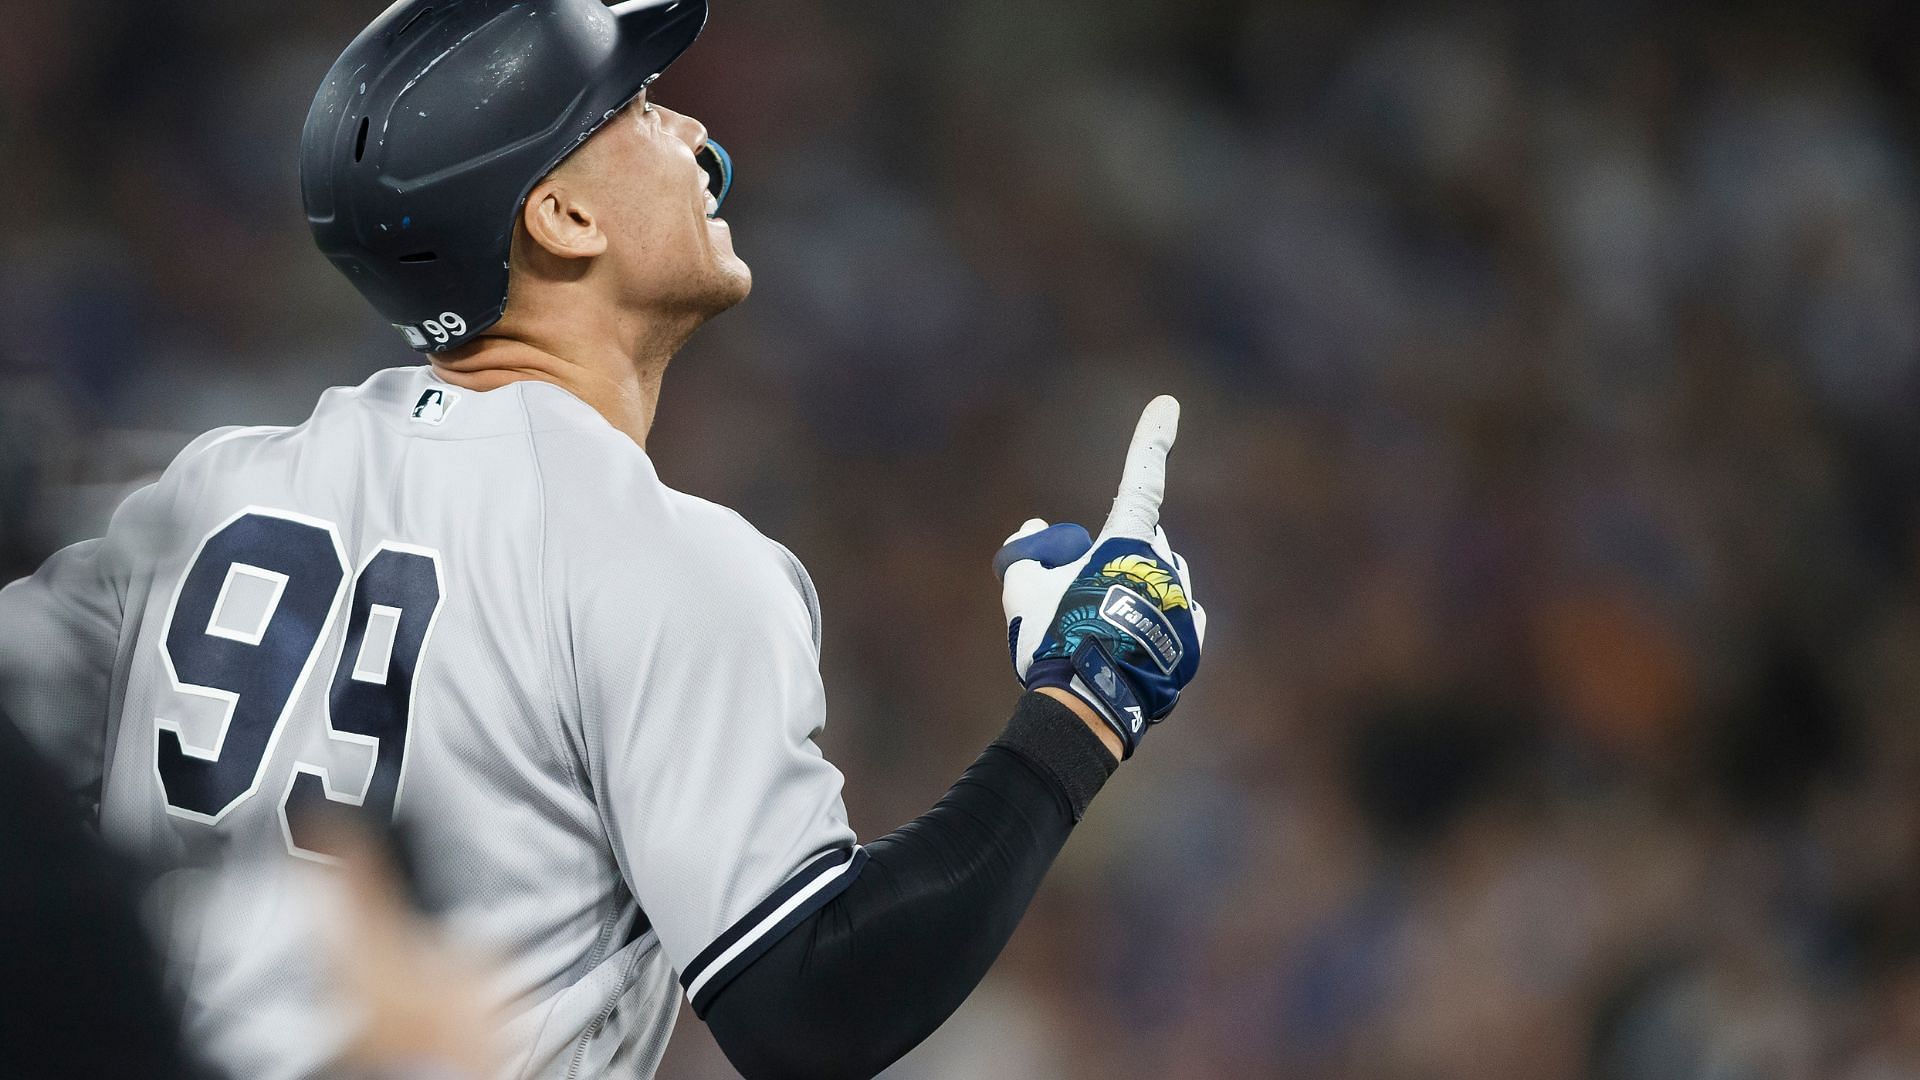 Aaron Judge is having an unforgettable season with the Yankees creating numerous records this season